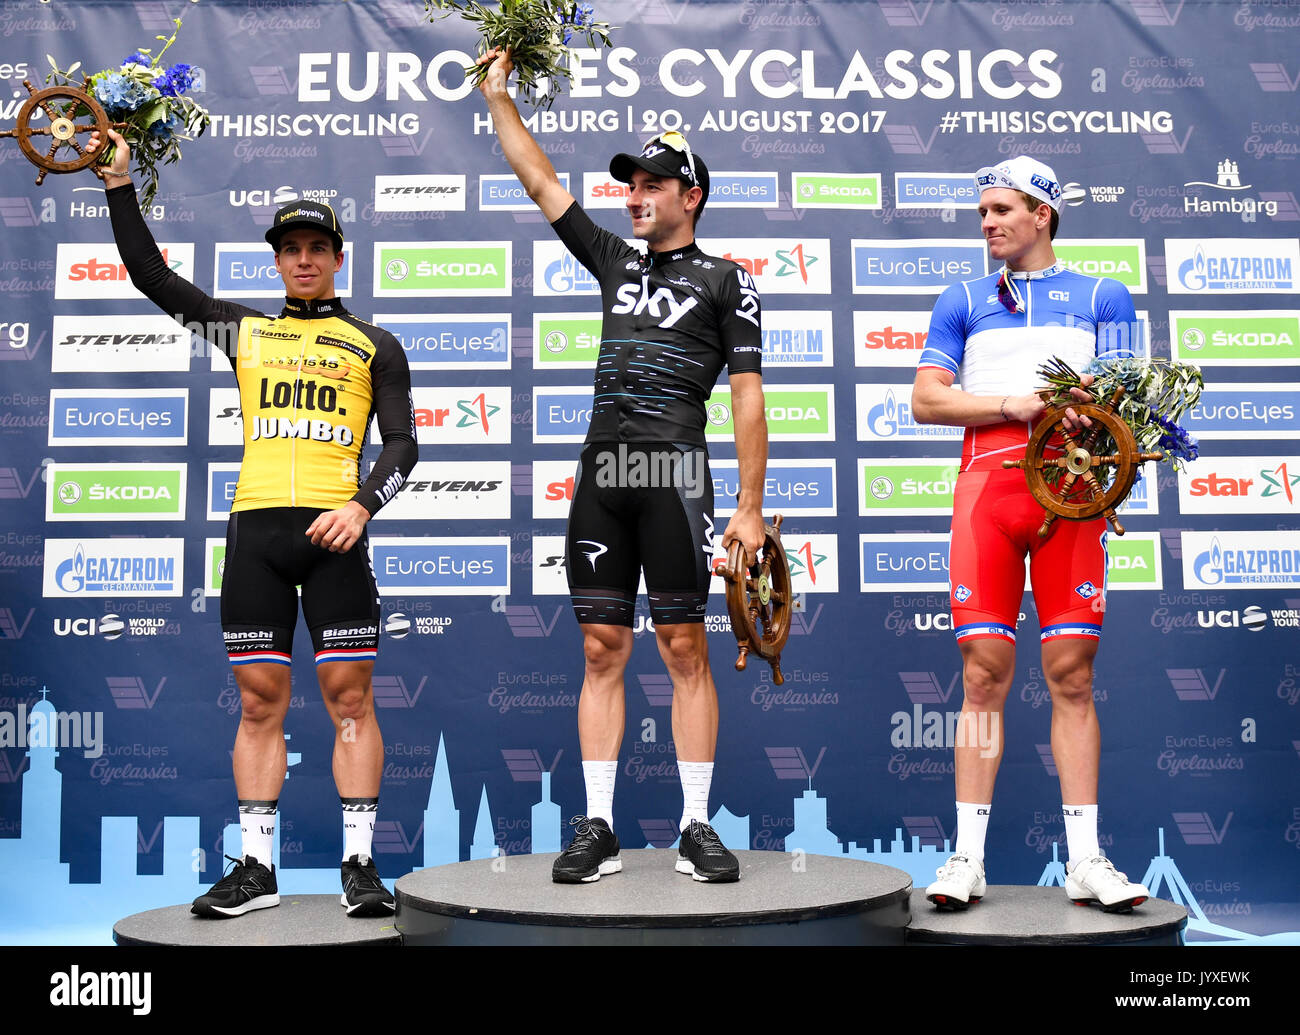 Hamburg, Germany. 20th Aug, 2017. Elia Viviani (C) of Italy celebrates his victory in the Euro Eyes Cyclassics in Hamburg, Germany, 20 August 2017. Arnaud Demare of France (R) came second and Dylan Groenewegen of the Netherlands (L) came third. Photo: Axel Heimken/dpa/Alamy Live News Stock Photo